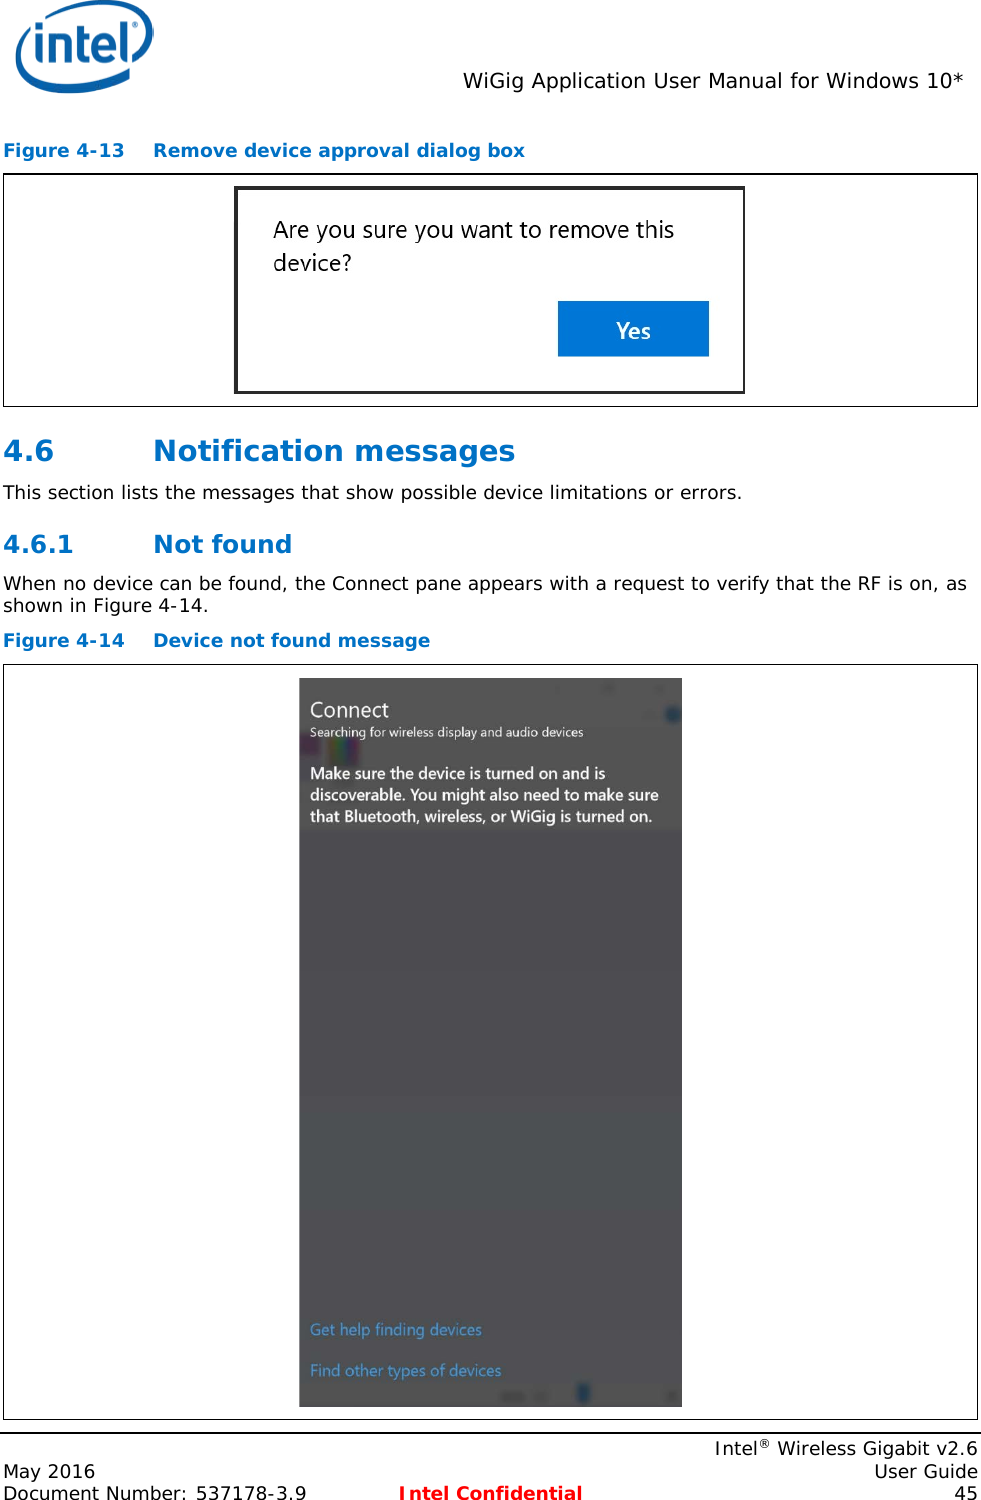  WiGig Application User Manual for Windows 10*    Intel® Wireless Gigabit v2.6 May 2016    User Guide Document Number: 537178-3.9 Intel Confidential 45 Figure 4-13 Remove device approval dialog box  4.6 Notification messages  This section lists the messages that show possible device limitations or errors. 4.6.1 Not found When no device can be found, the Connect pane appears with a request to verify that the RF is on, as shown in Figure 4-14. Figure 4-14 Device not found message  